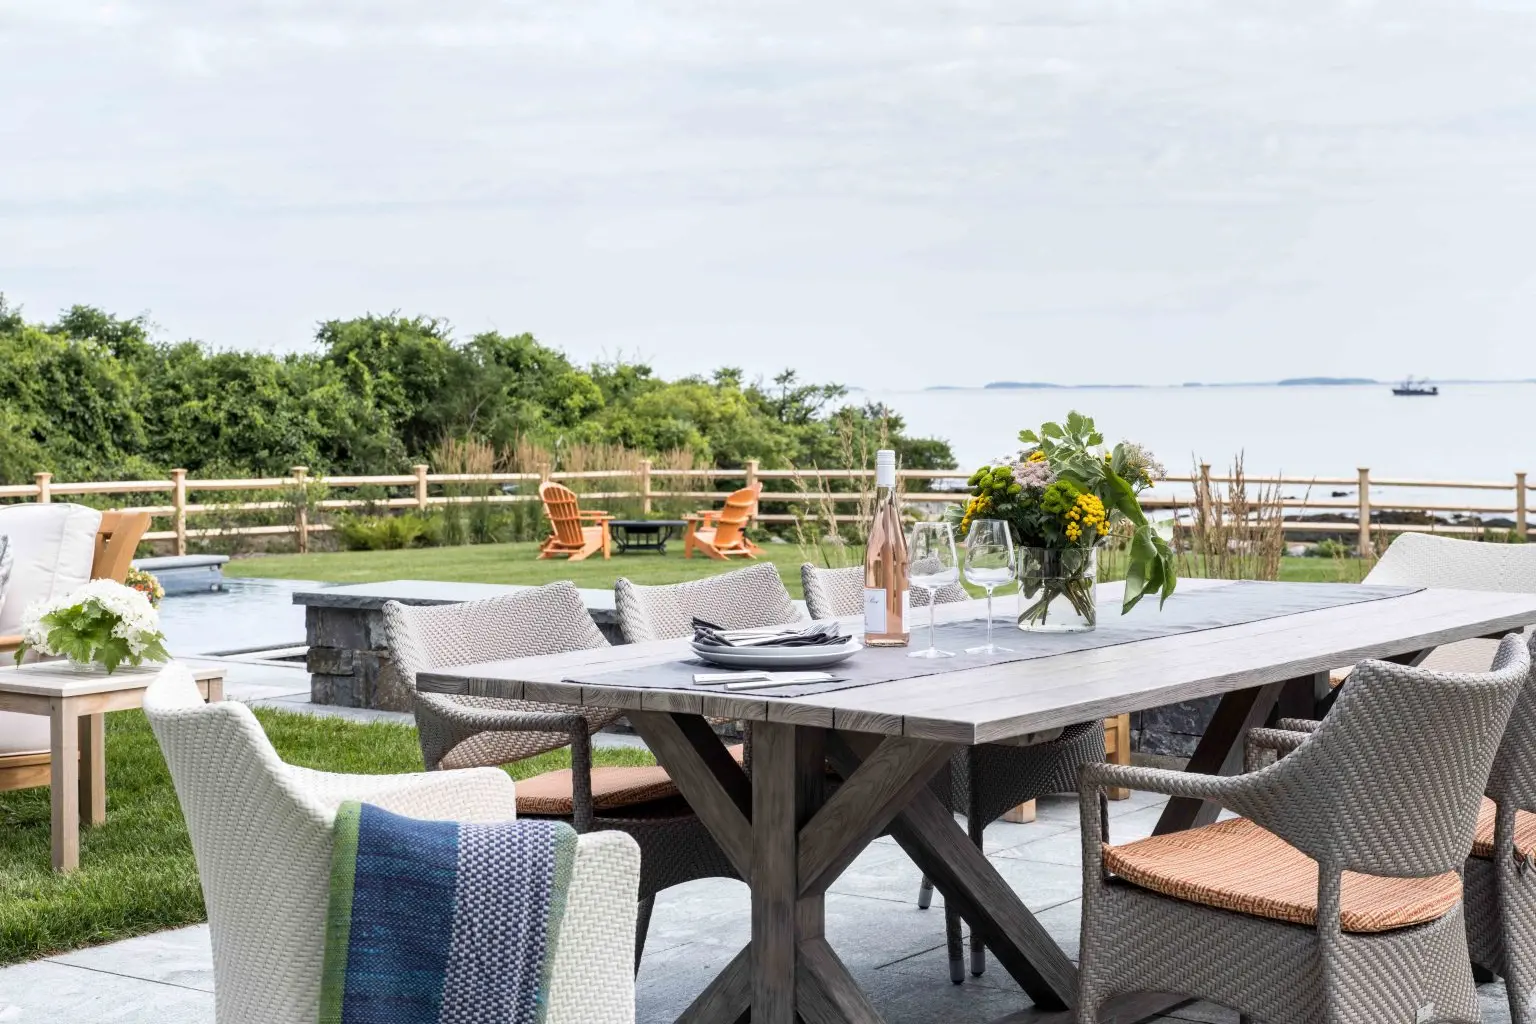 Outdoor dining on the coast of Maine